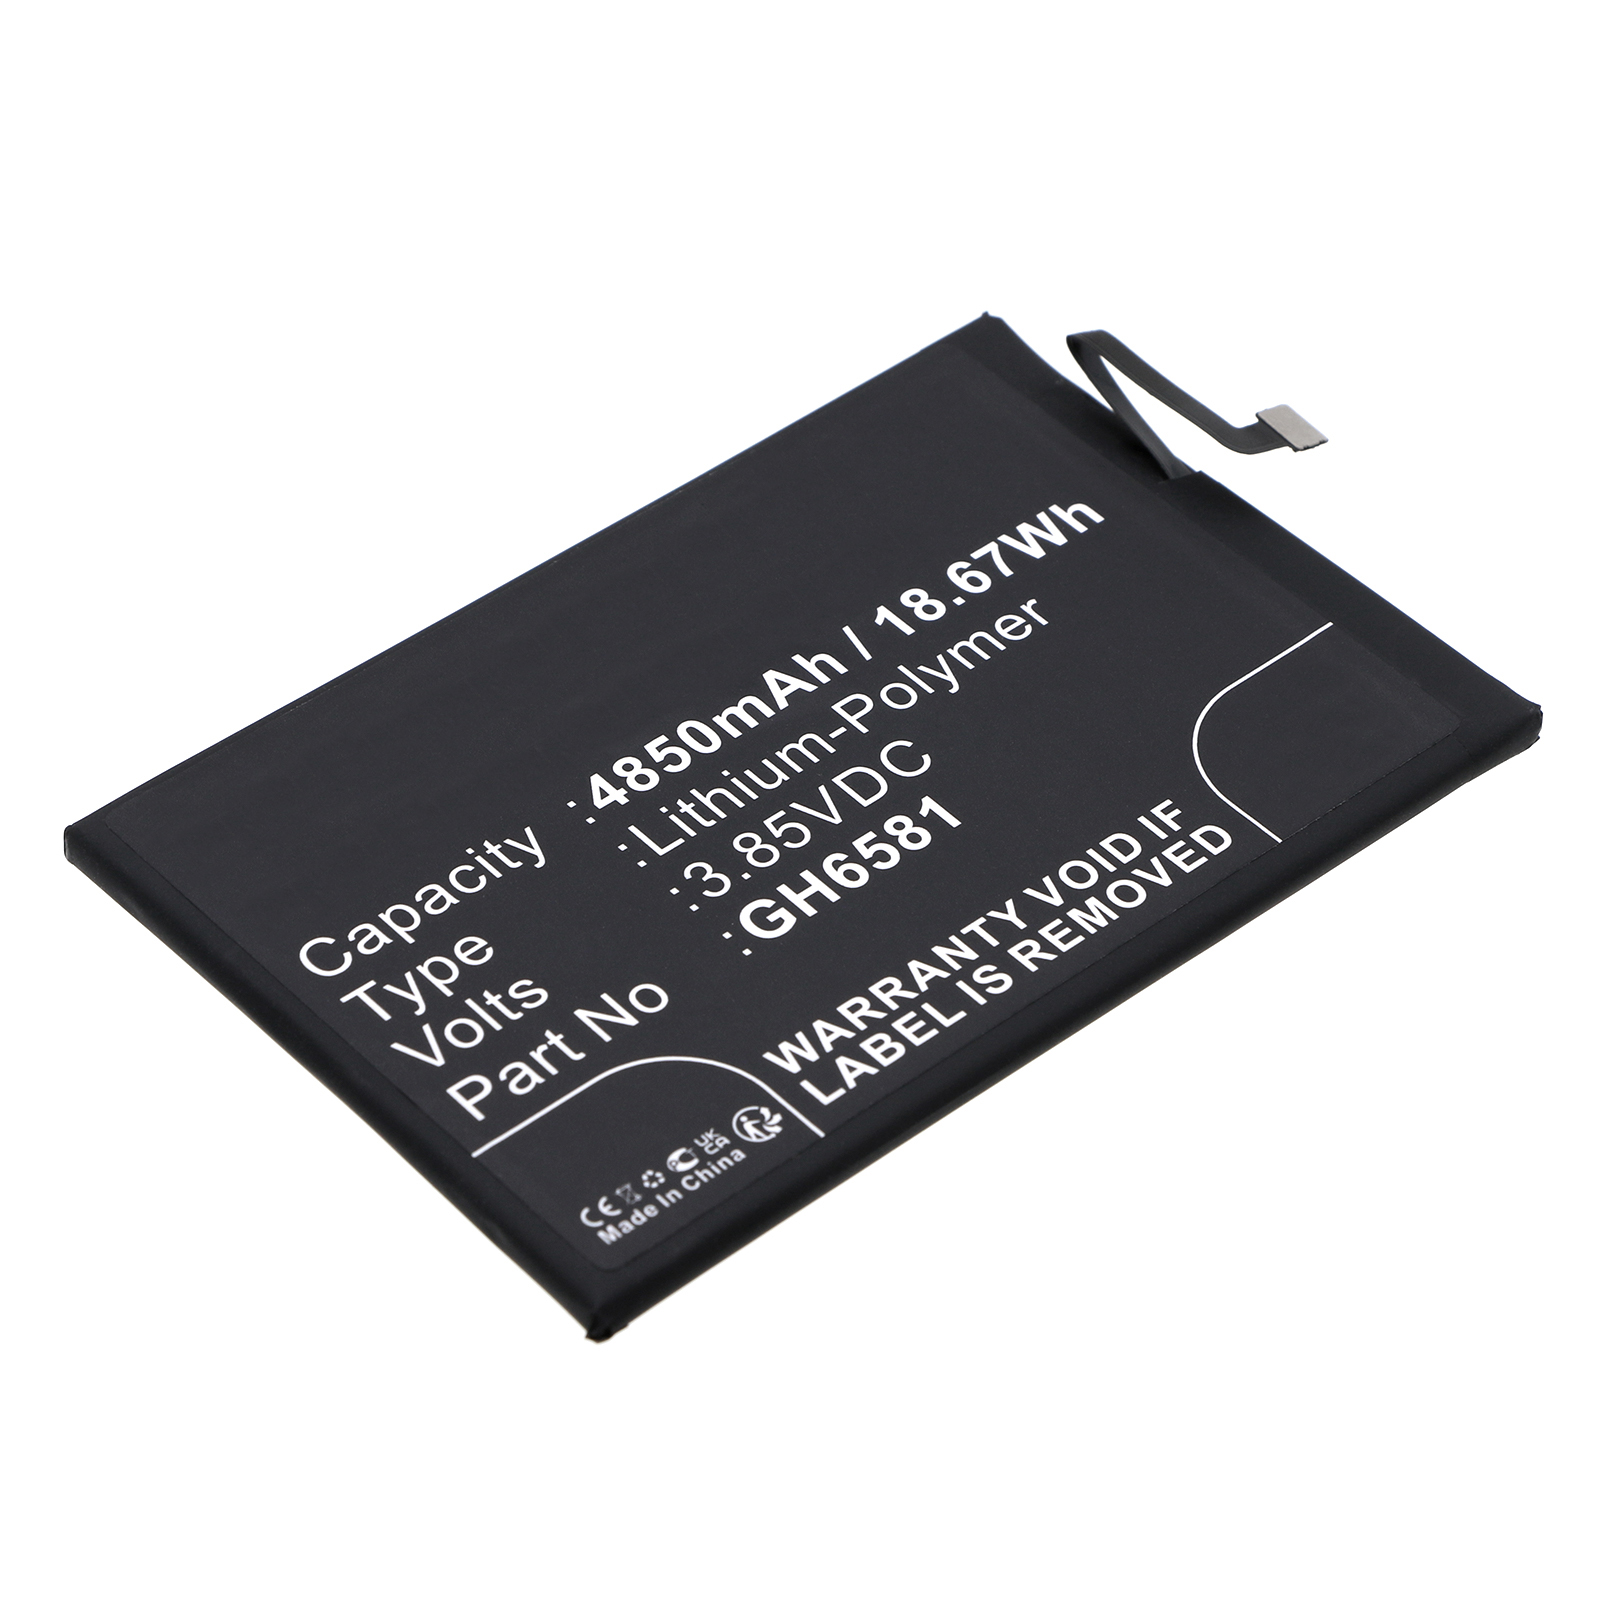 Synergy Digital Cell Phone Battery, Compatible with Nokia GH6581 Cell Phone Battery (Li-Pol, 3.85V, 4850mAh)